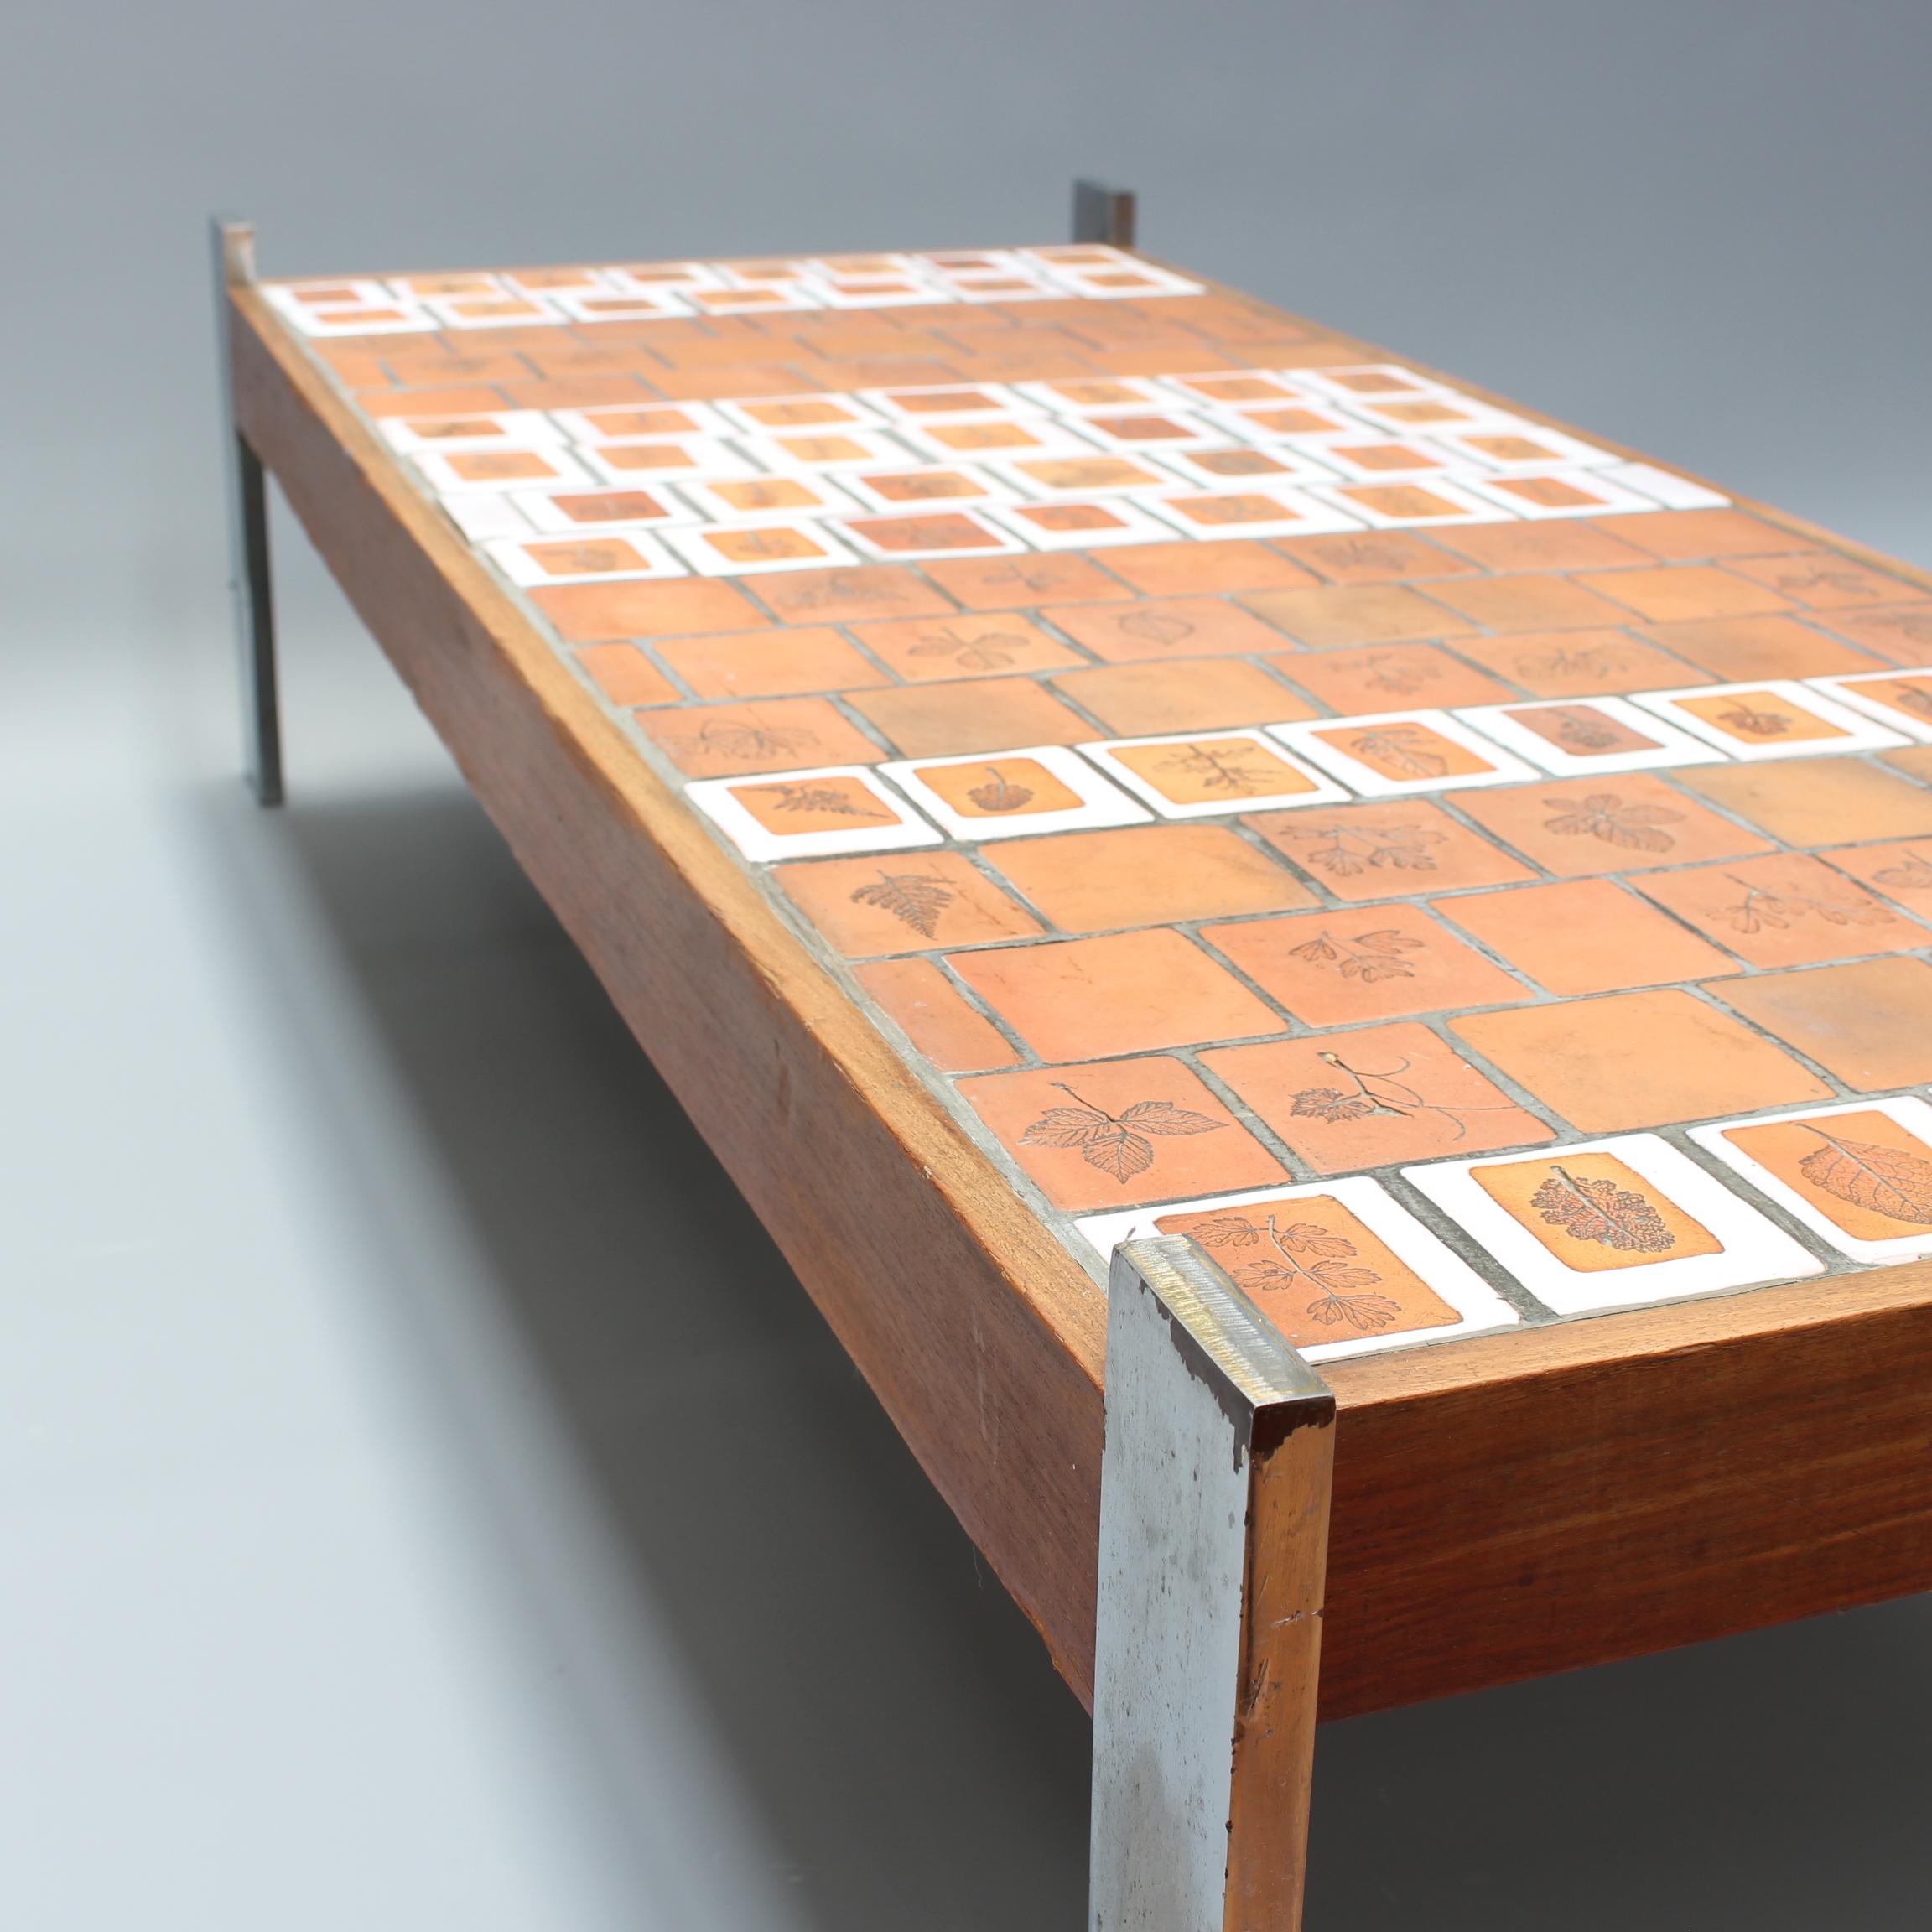 Vintage French Coffee Table with Leaf Motif Tiles by Roger Capron (circa 1970s) For Sale 8